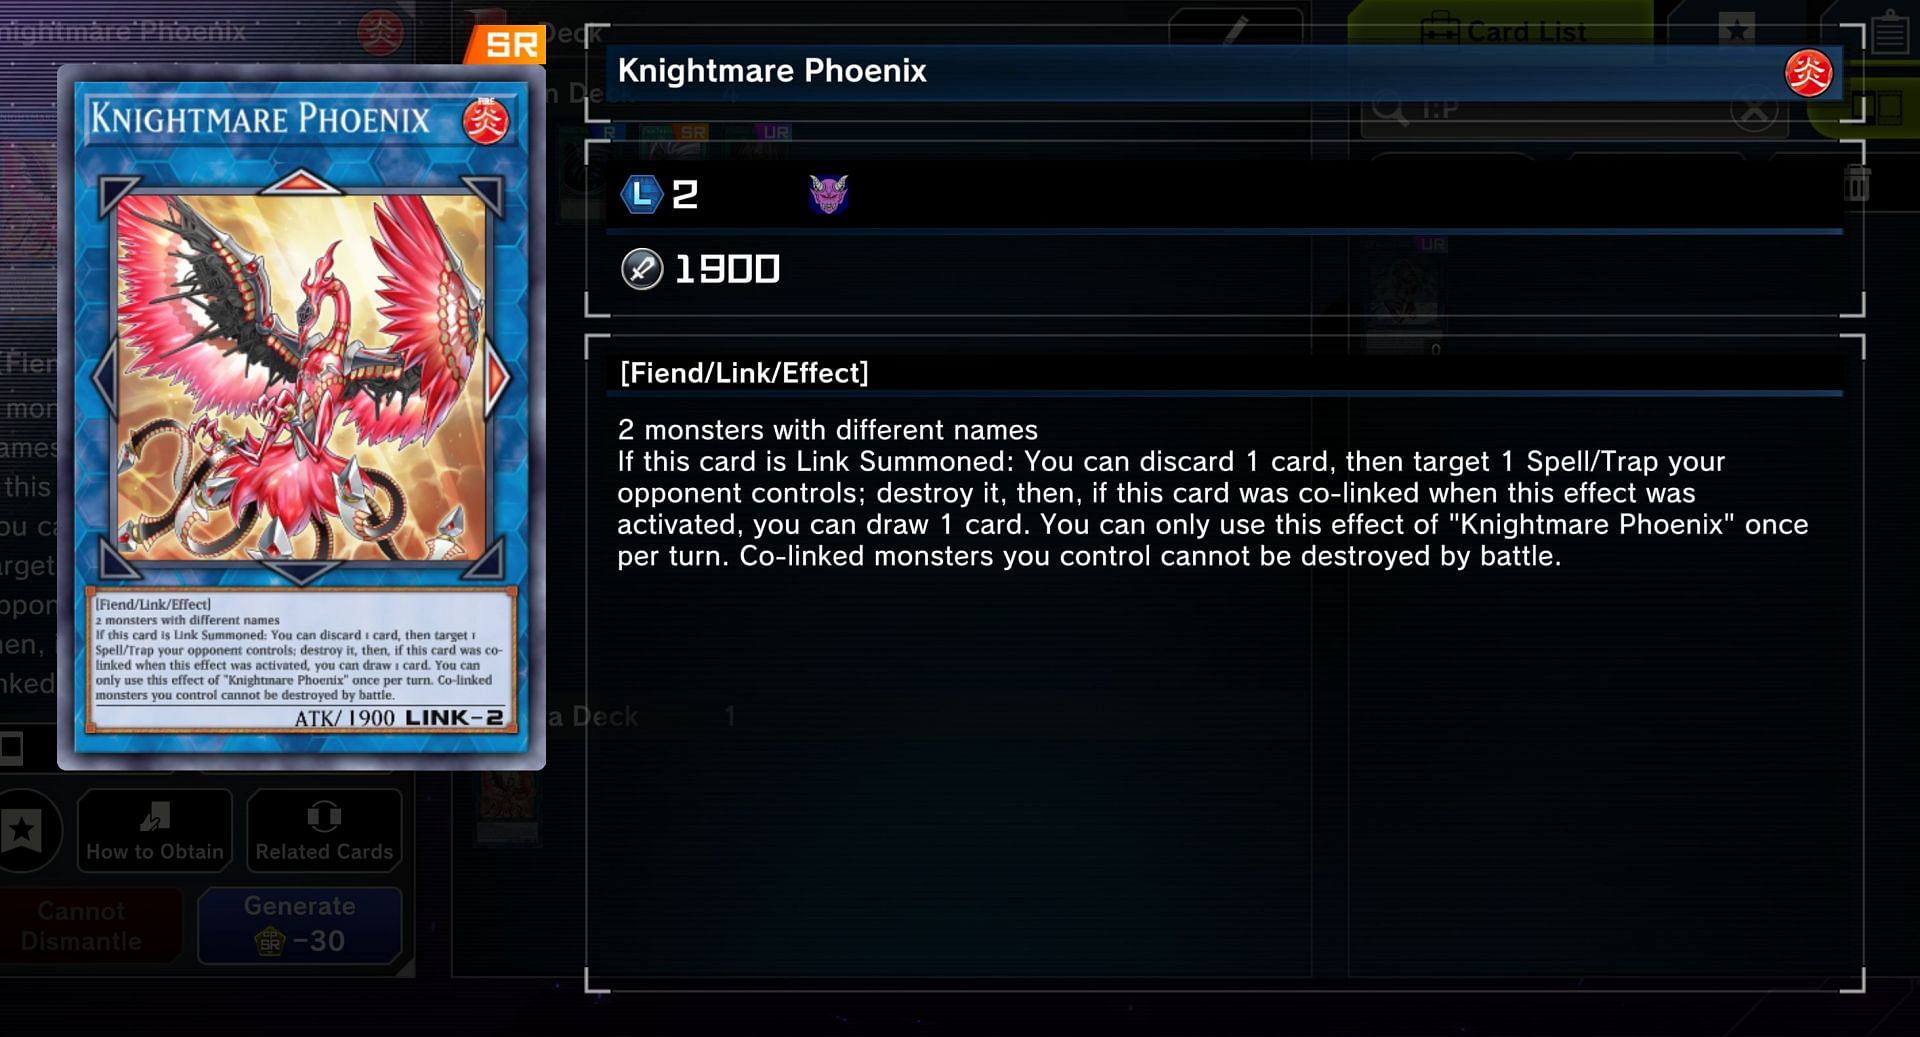 While not as great as I:P Masquerena, Knightmare Phoenix can replace that card in the deck (Image via Konami)